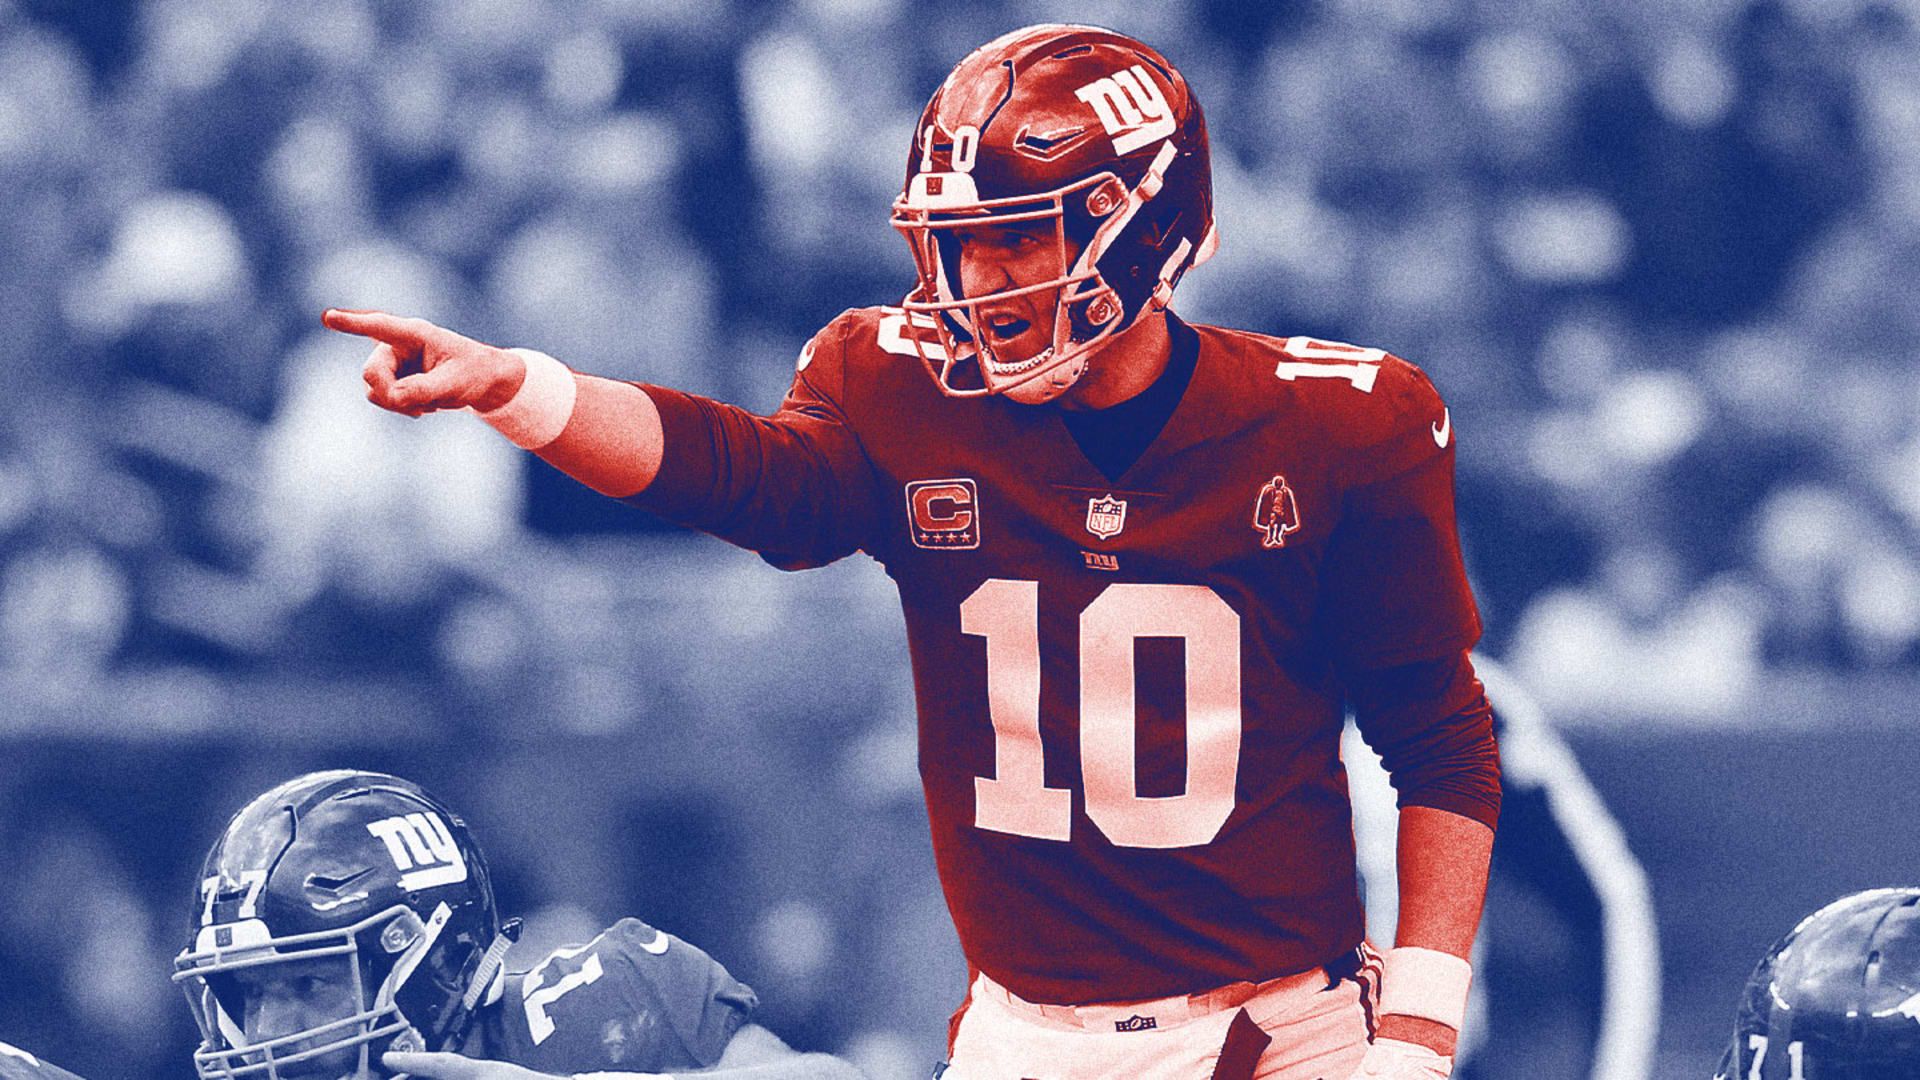 NFL Quarterback Rankings: Every Starting QB From Worst to Best